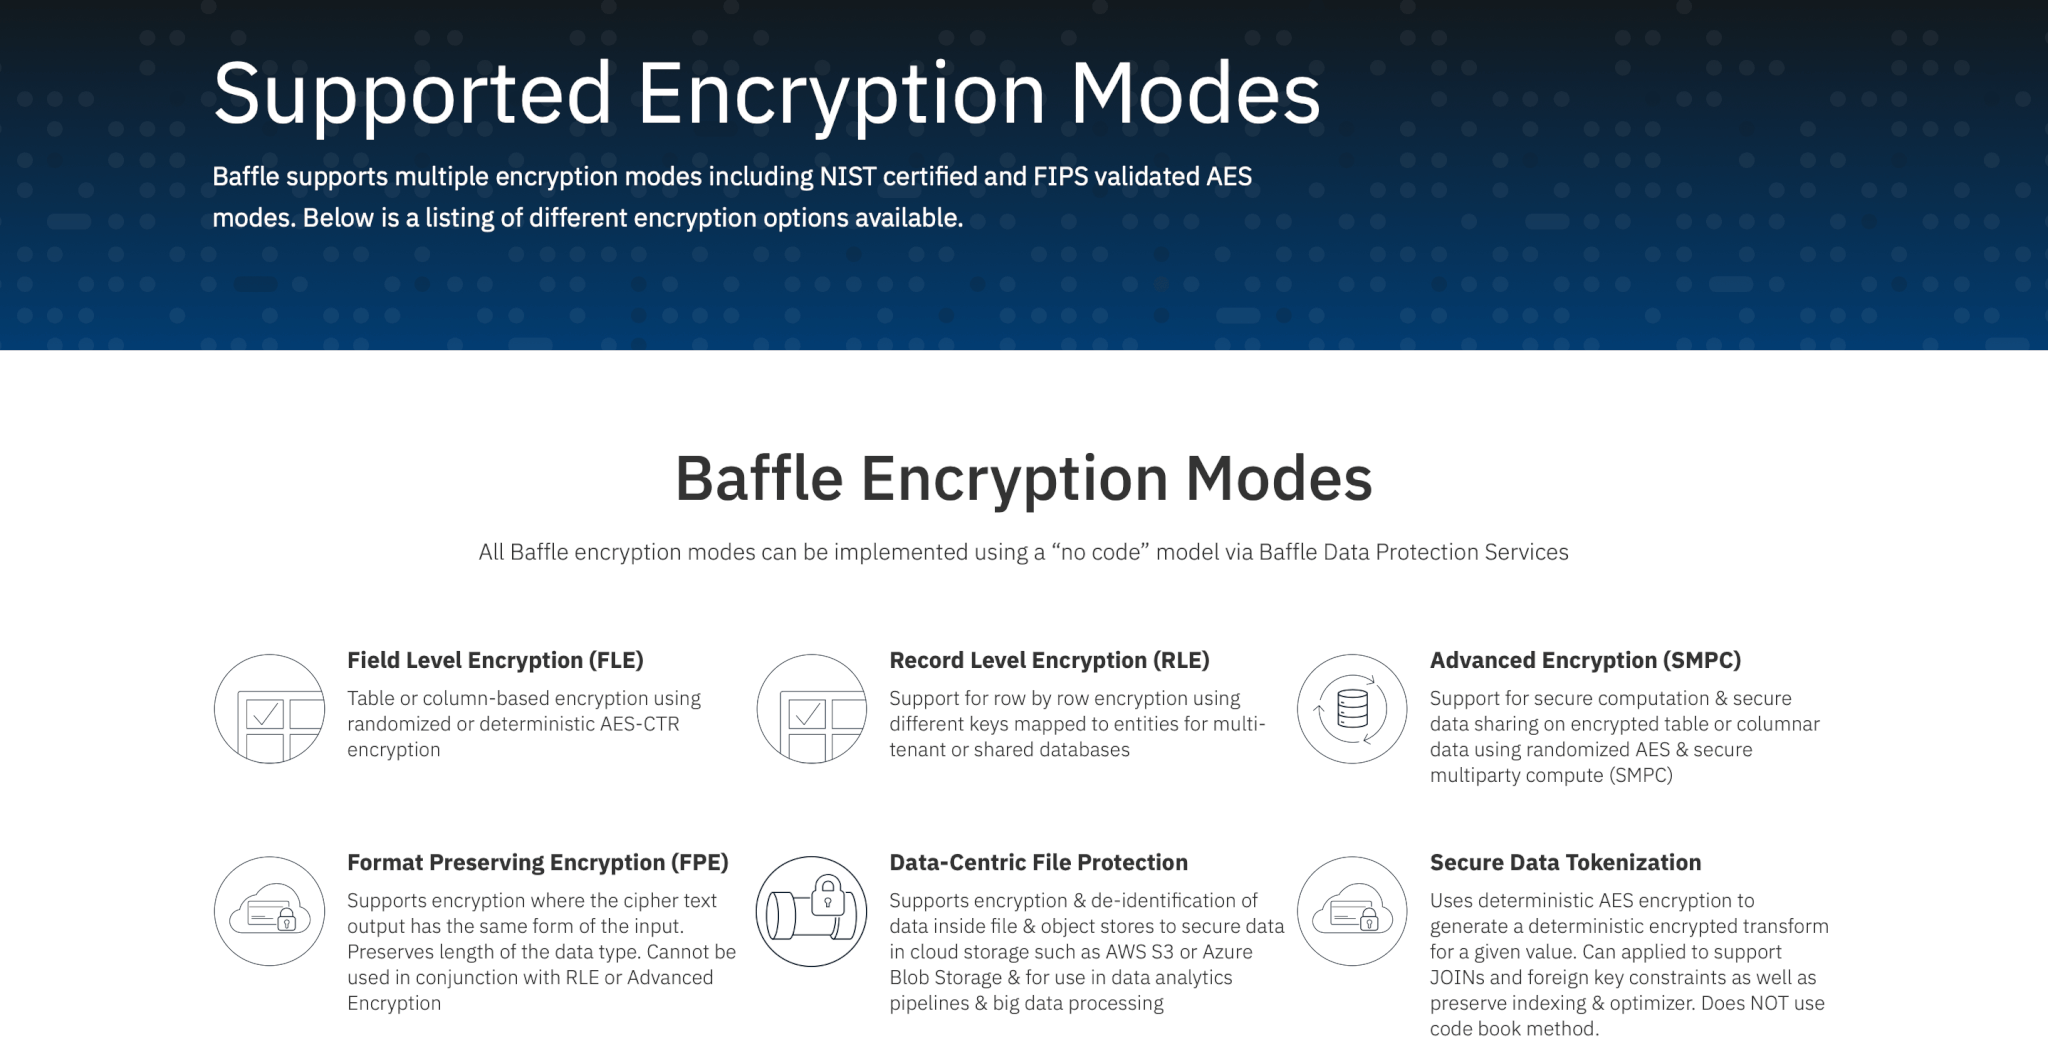 supportedEncryptionModes